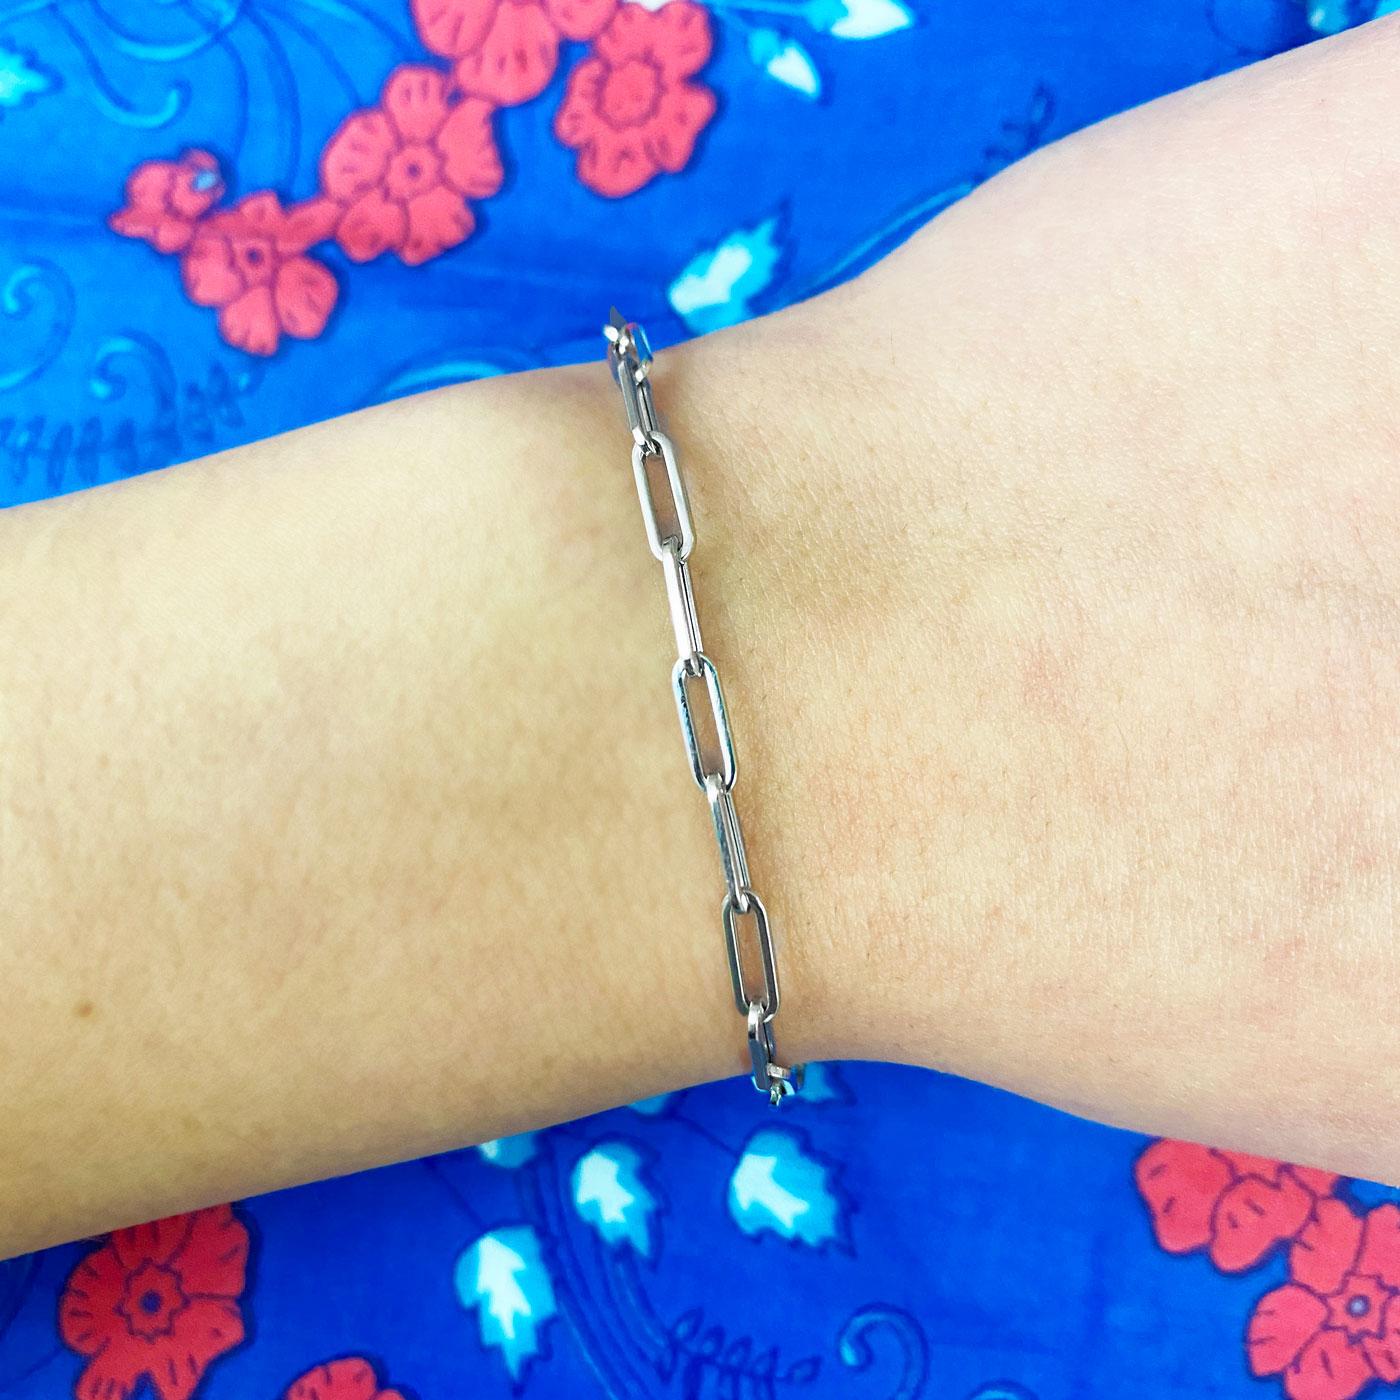 Material: 14K Italian White Gold 
Each paperclip link is approximately 8 x 3 millimeters
Lobster Clasp
Chain Length: 7 inches or clasp it through any link for a shorter length

This paperclip bracelet is super trendy and eye-catching! This piece is